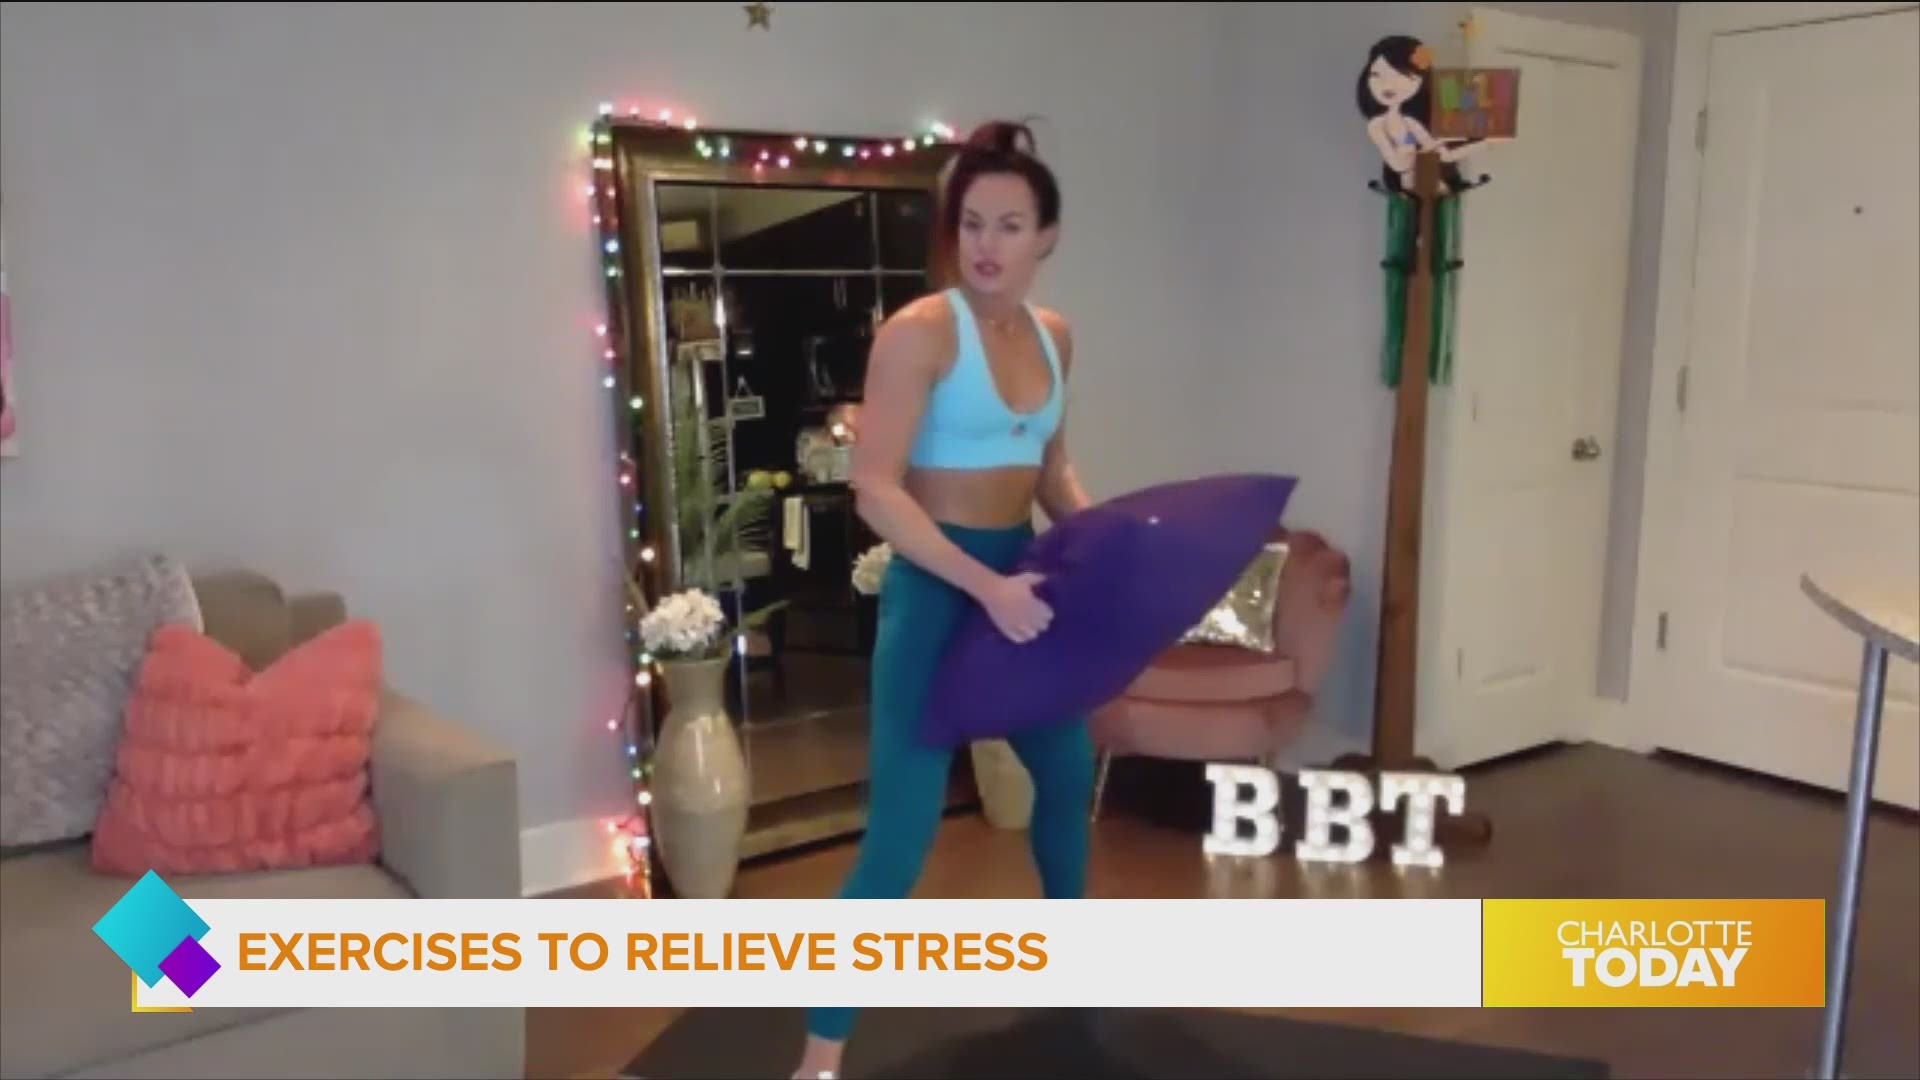 Take your frustrations out on a pillow, and get fit at the same time